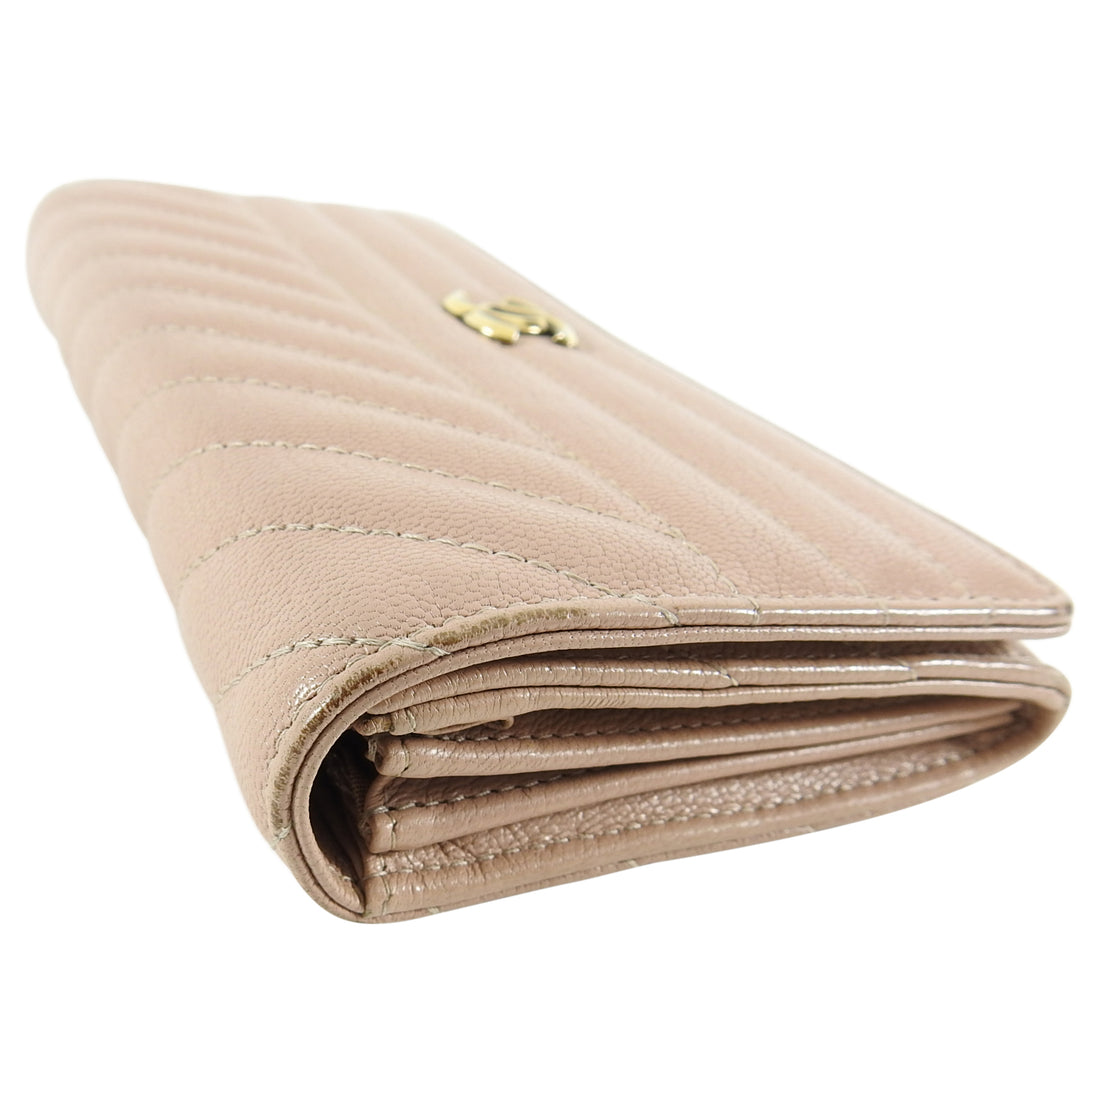 Chanel Nude Long Continental CC Wallet